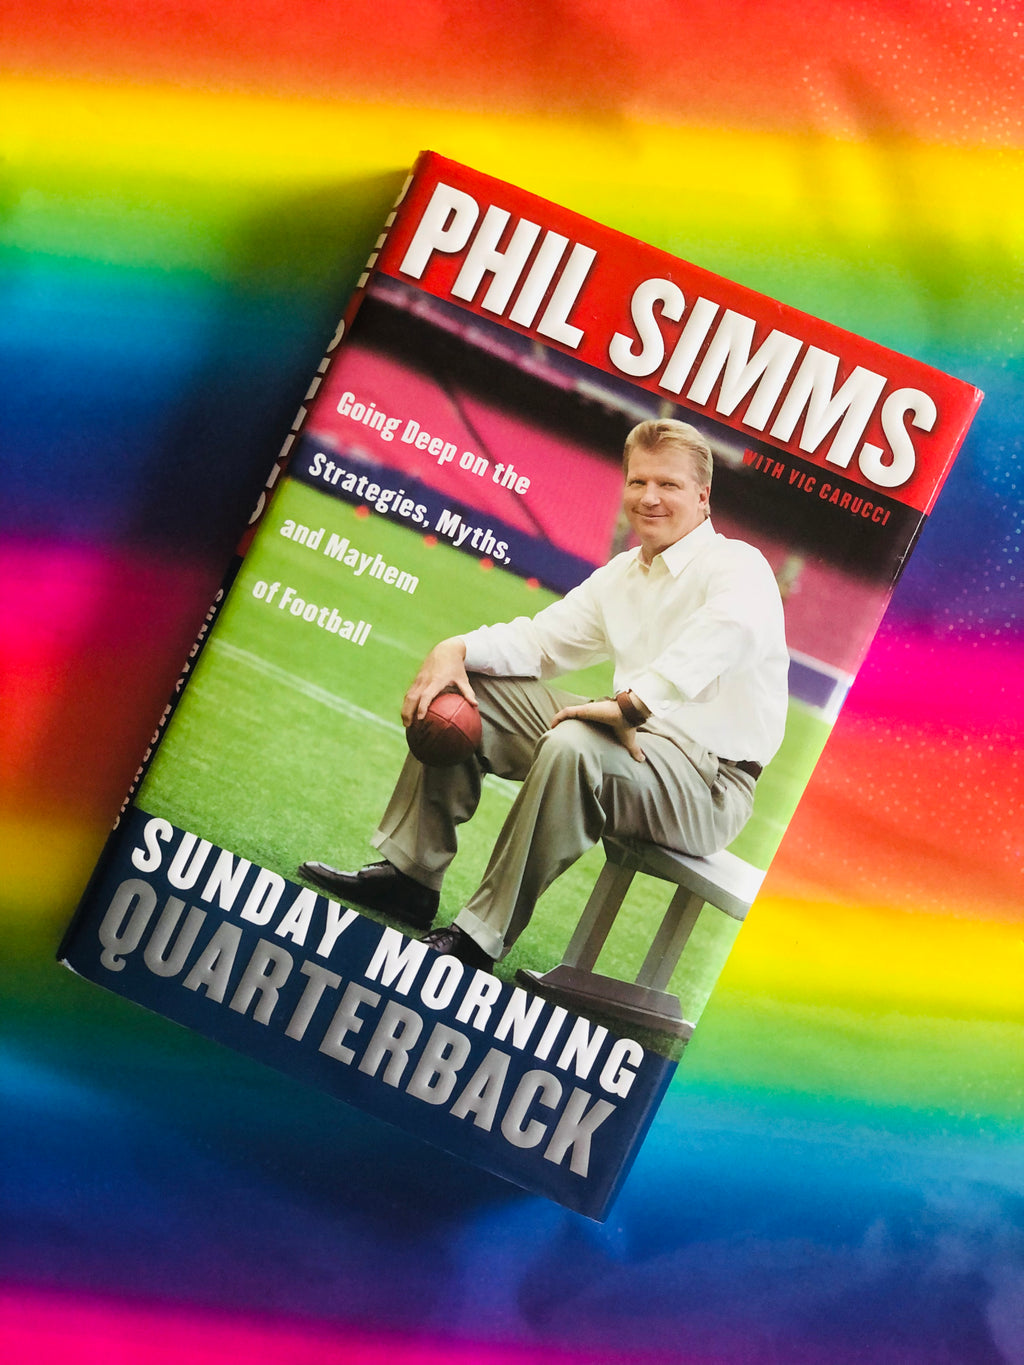 Sunday Morning Quarterback- By Phil Simms